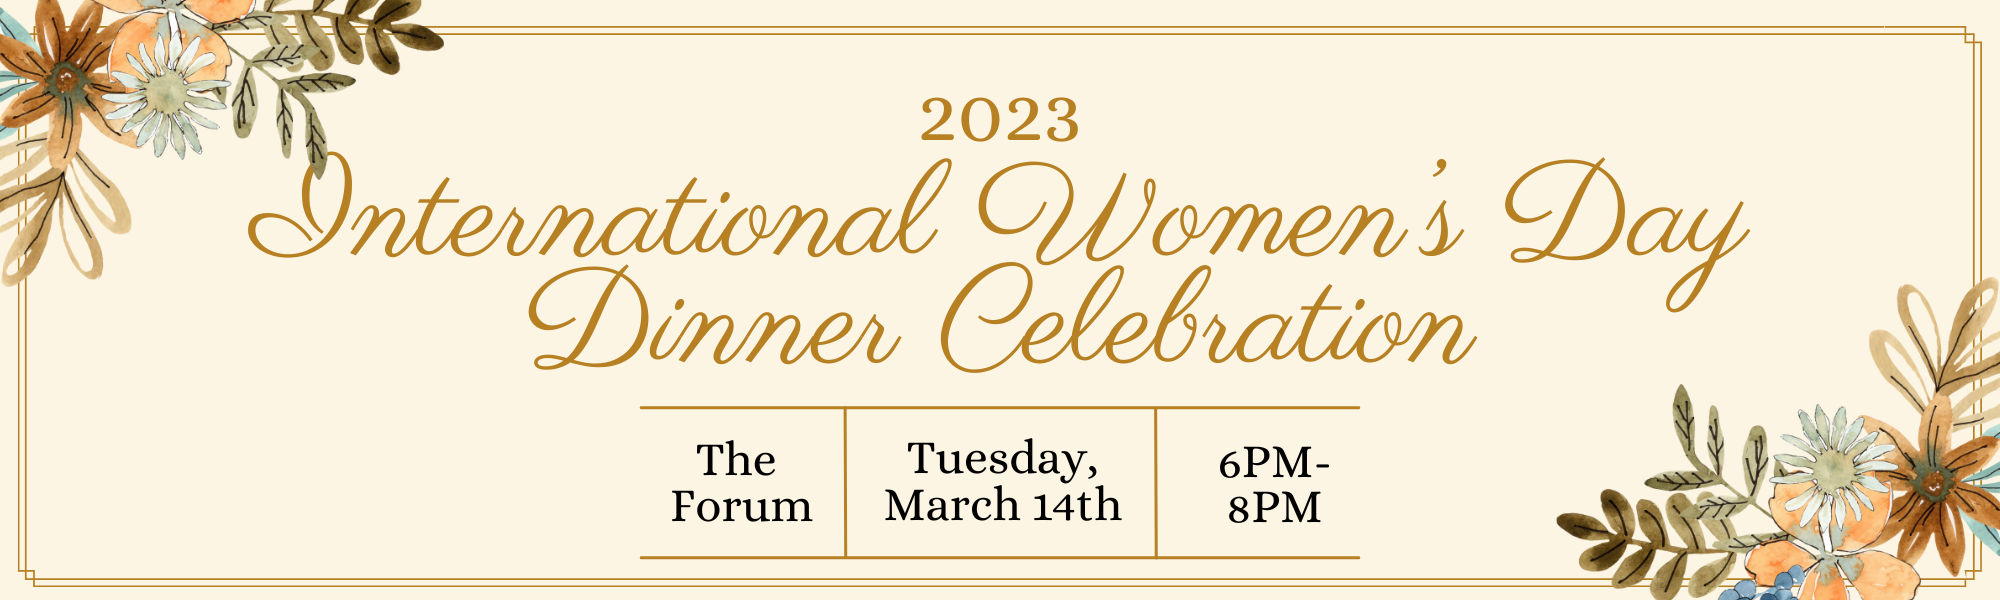 International Womens Day Celebration Dinner: Tuesday, March 14th, At the Forum, at 6pm to 8pm